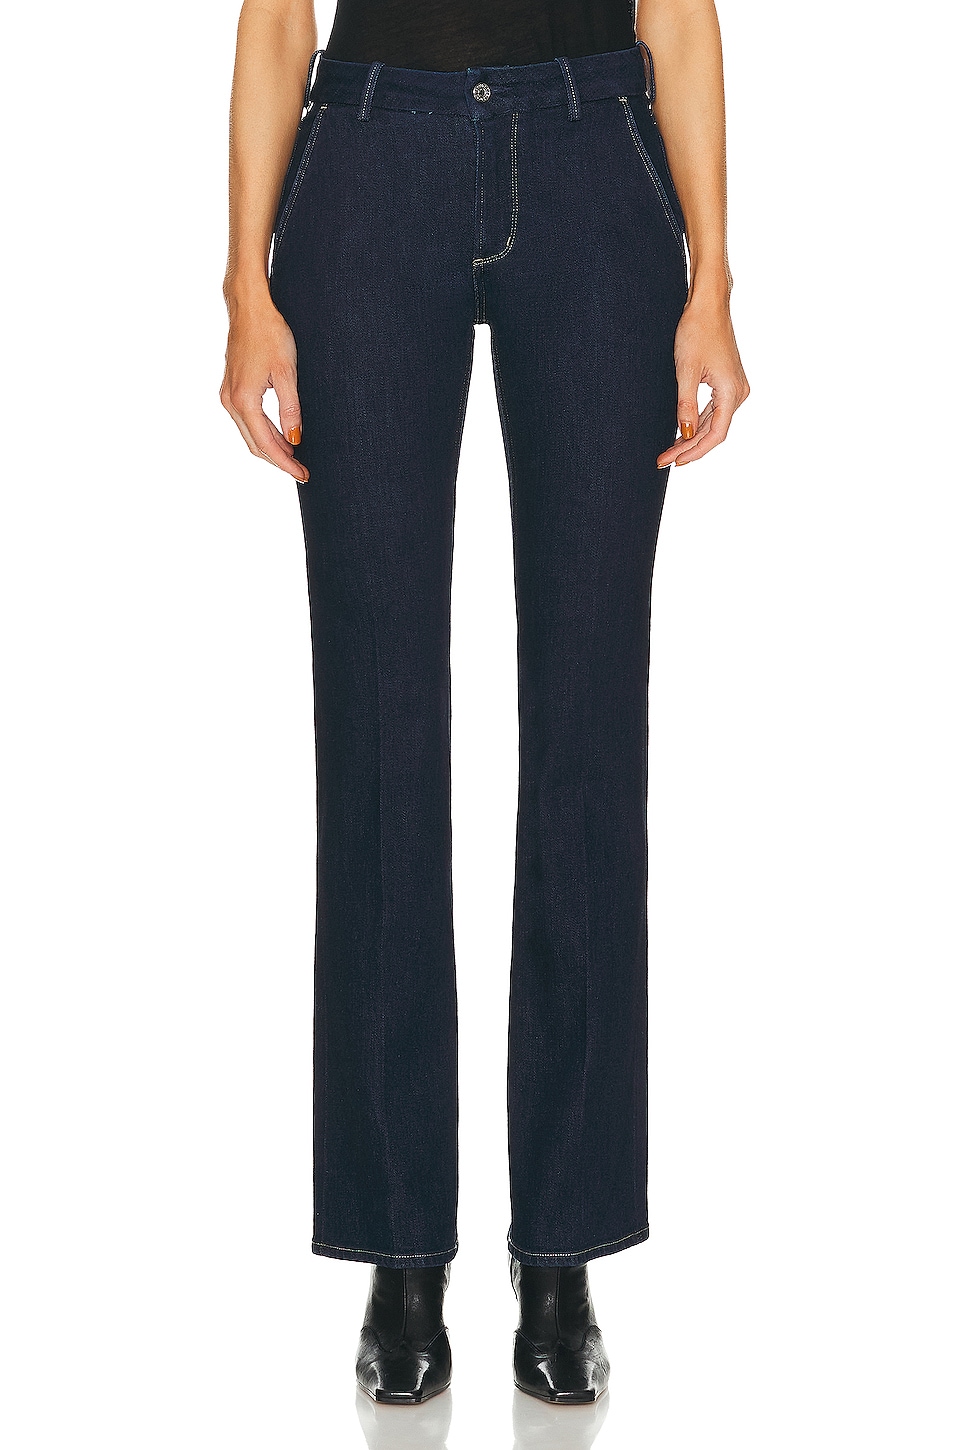 Image 1 of Citizens of Humanity Stella Trouser in Reva